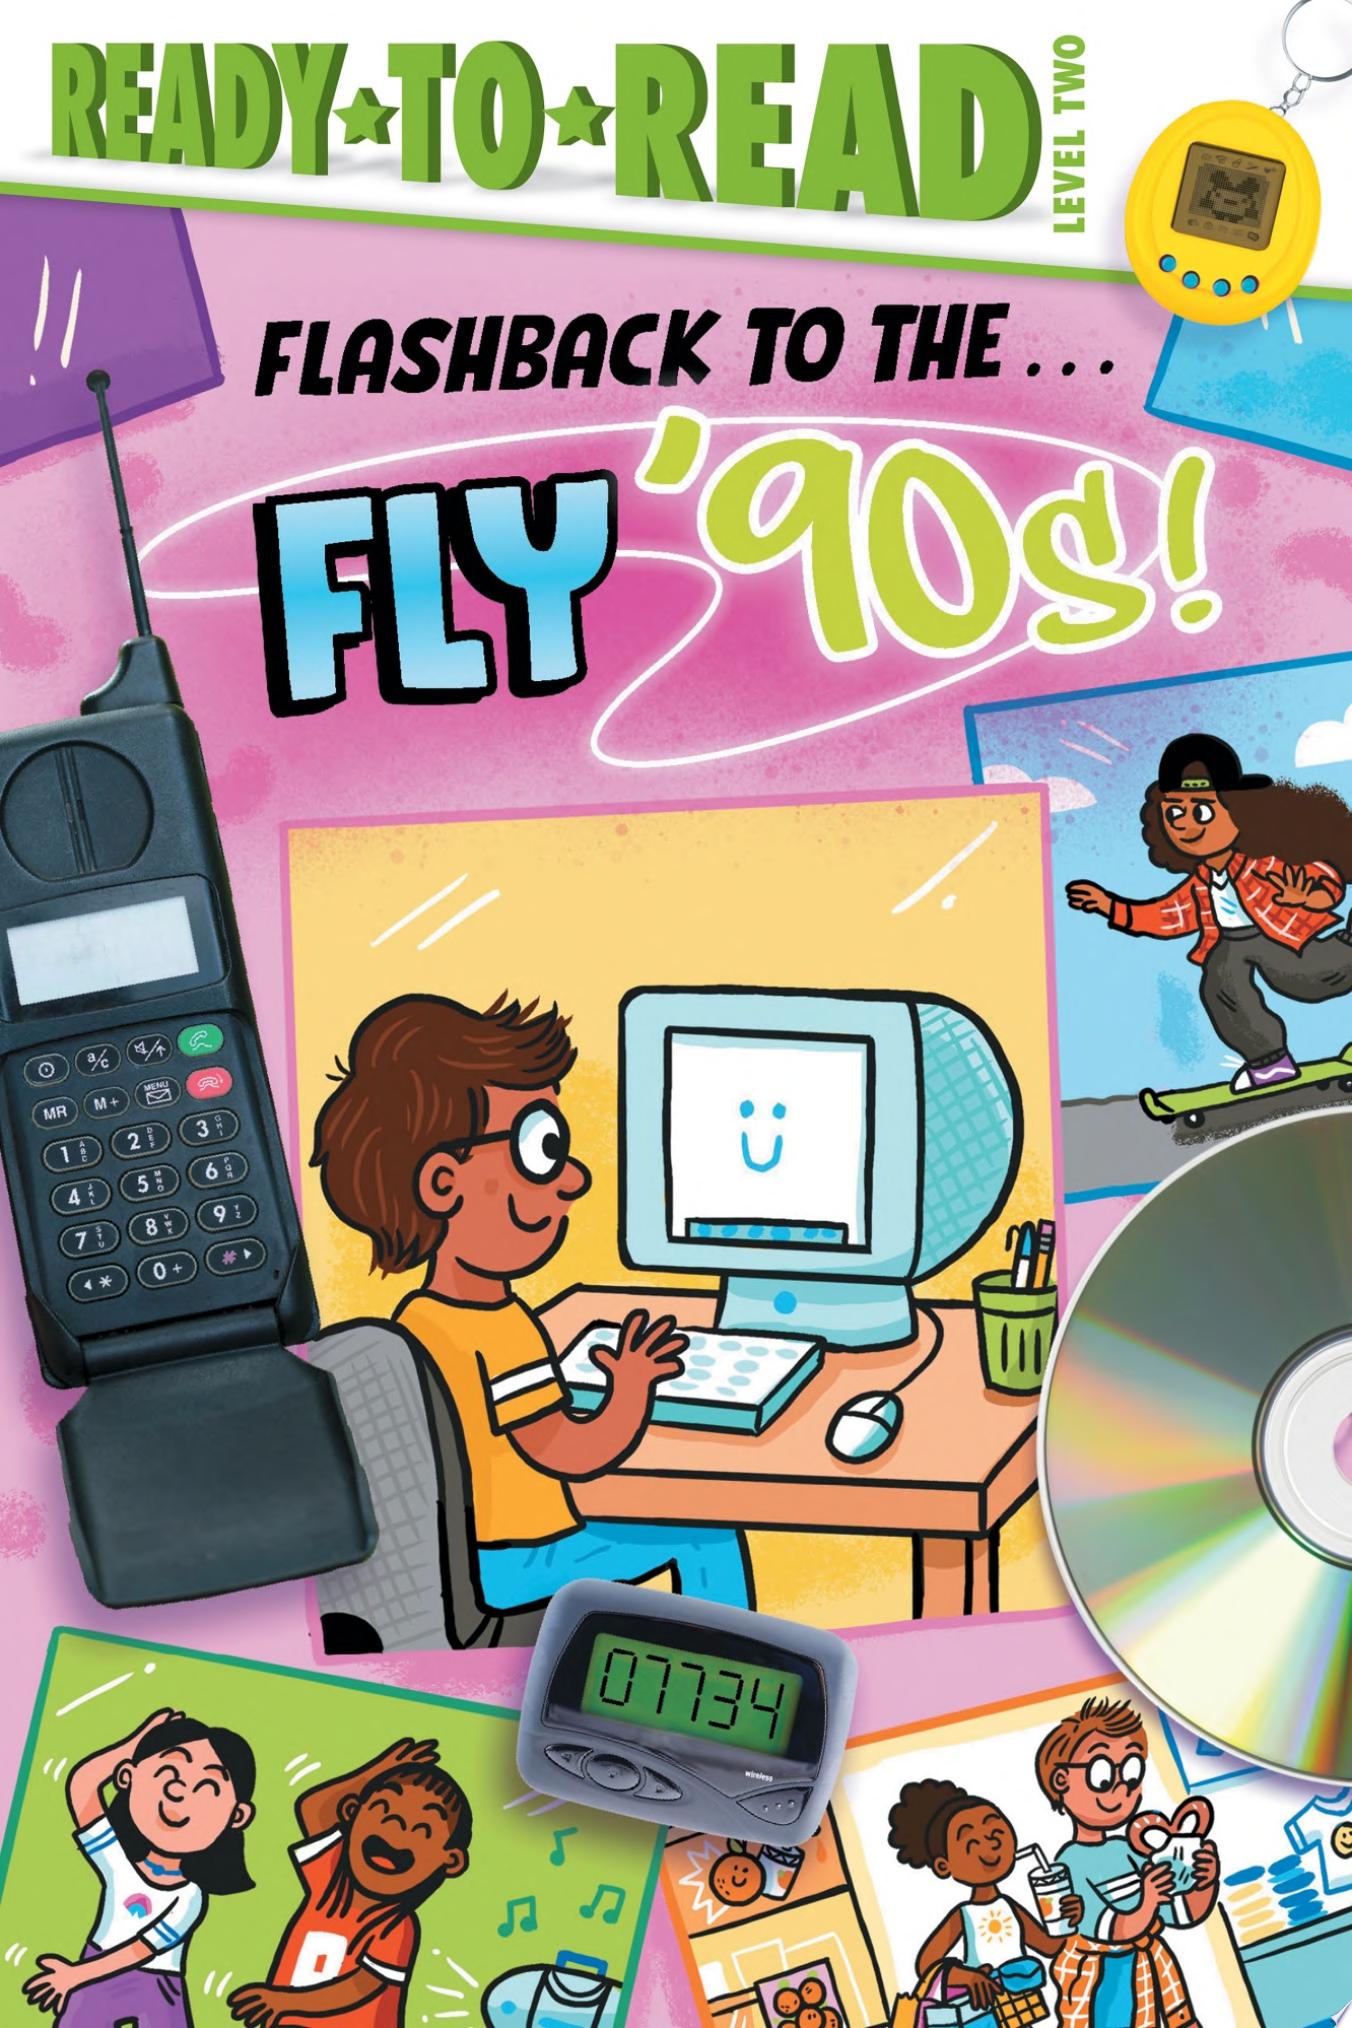 Image for "Flashback to the . . . Fly &#039;90s!"